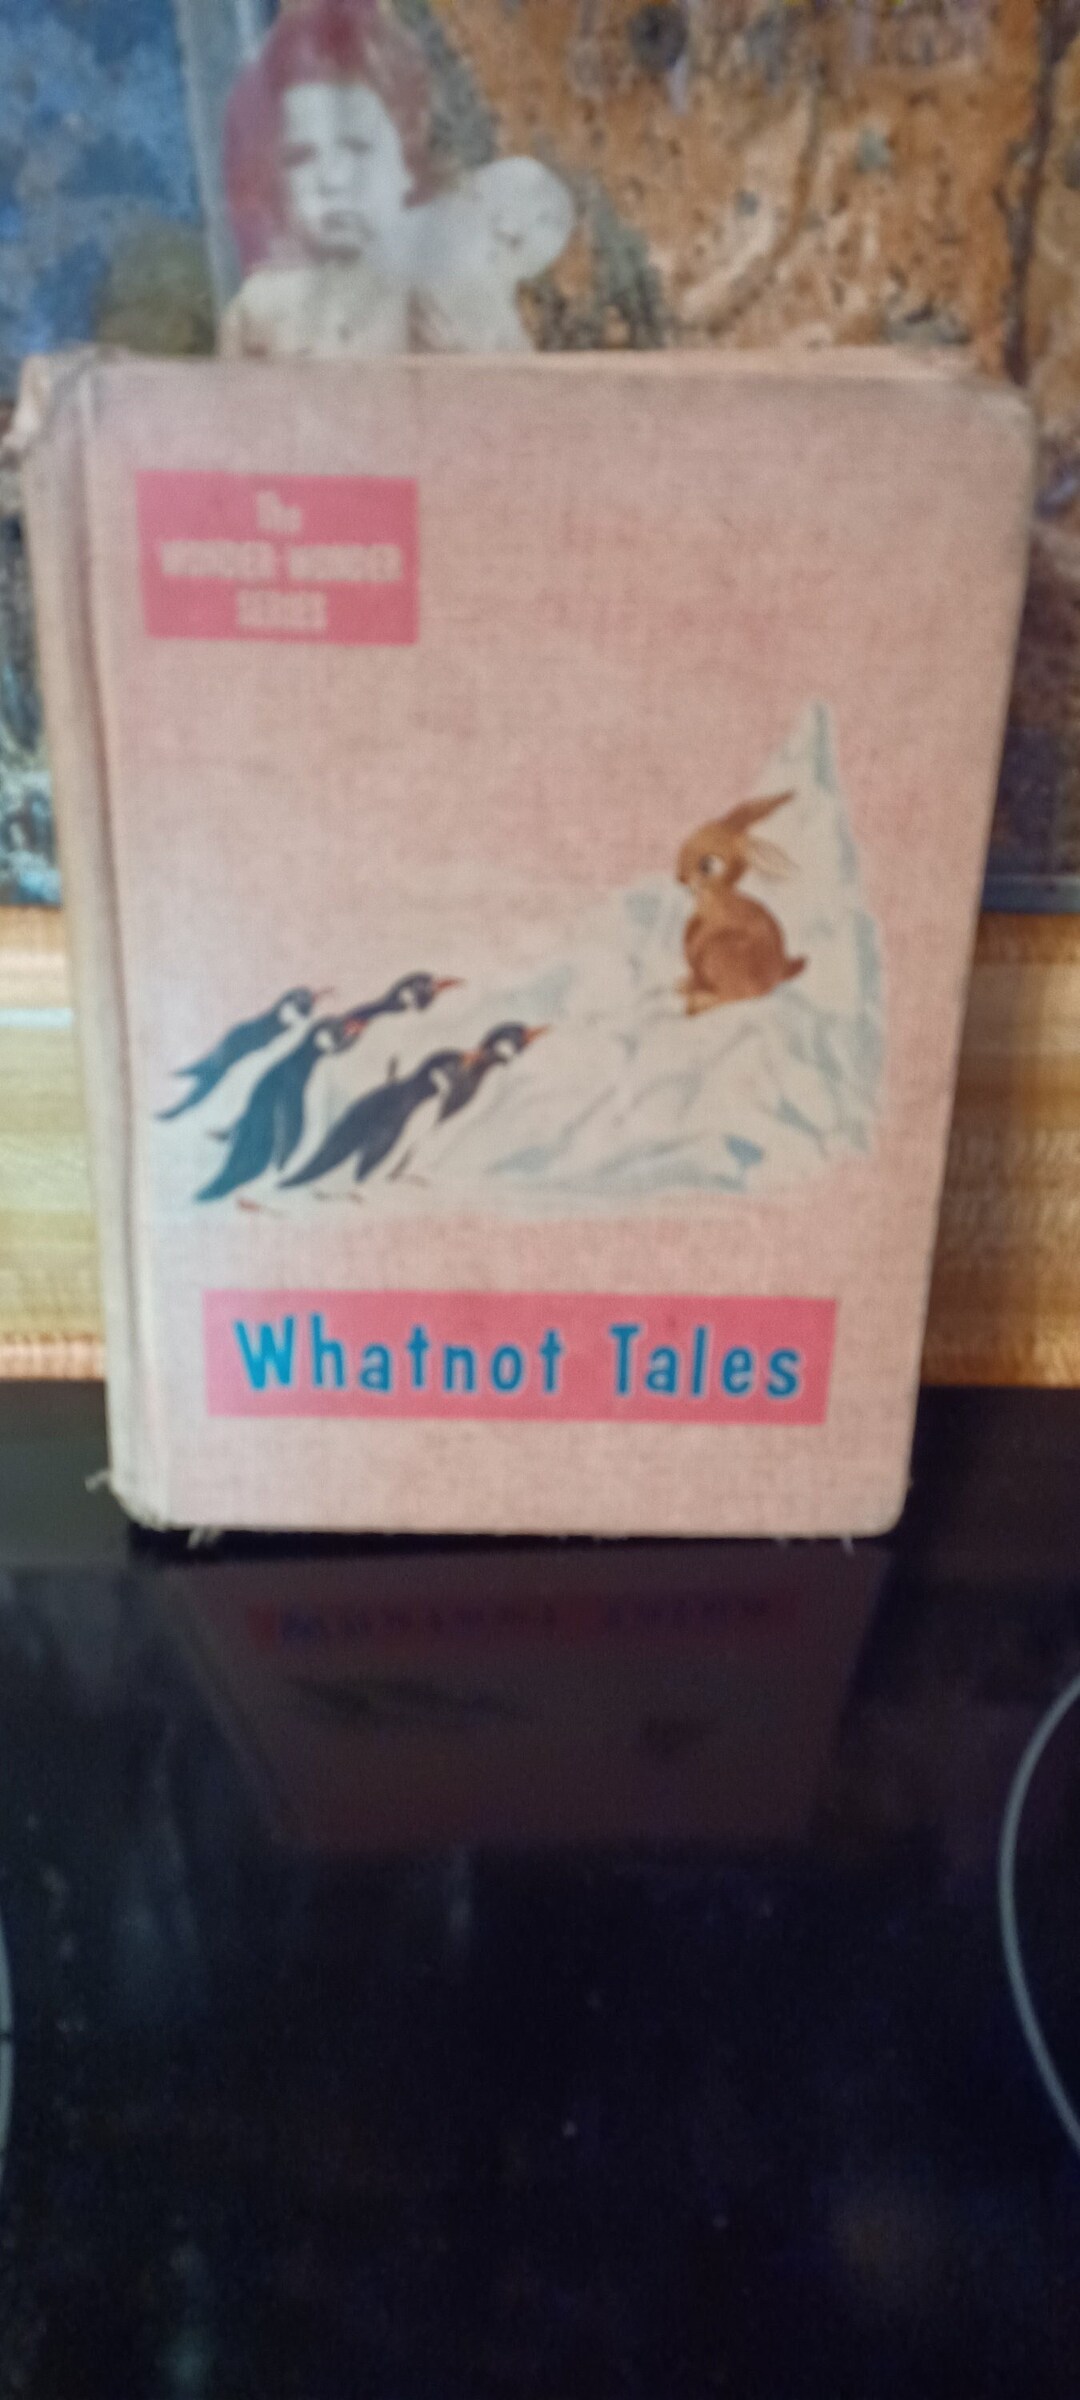 Old Vintage Whatnot Tales Book From 1957 - Etsy